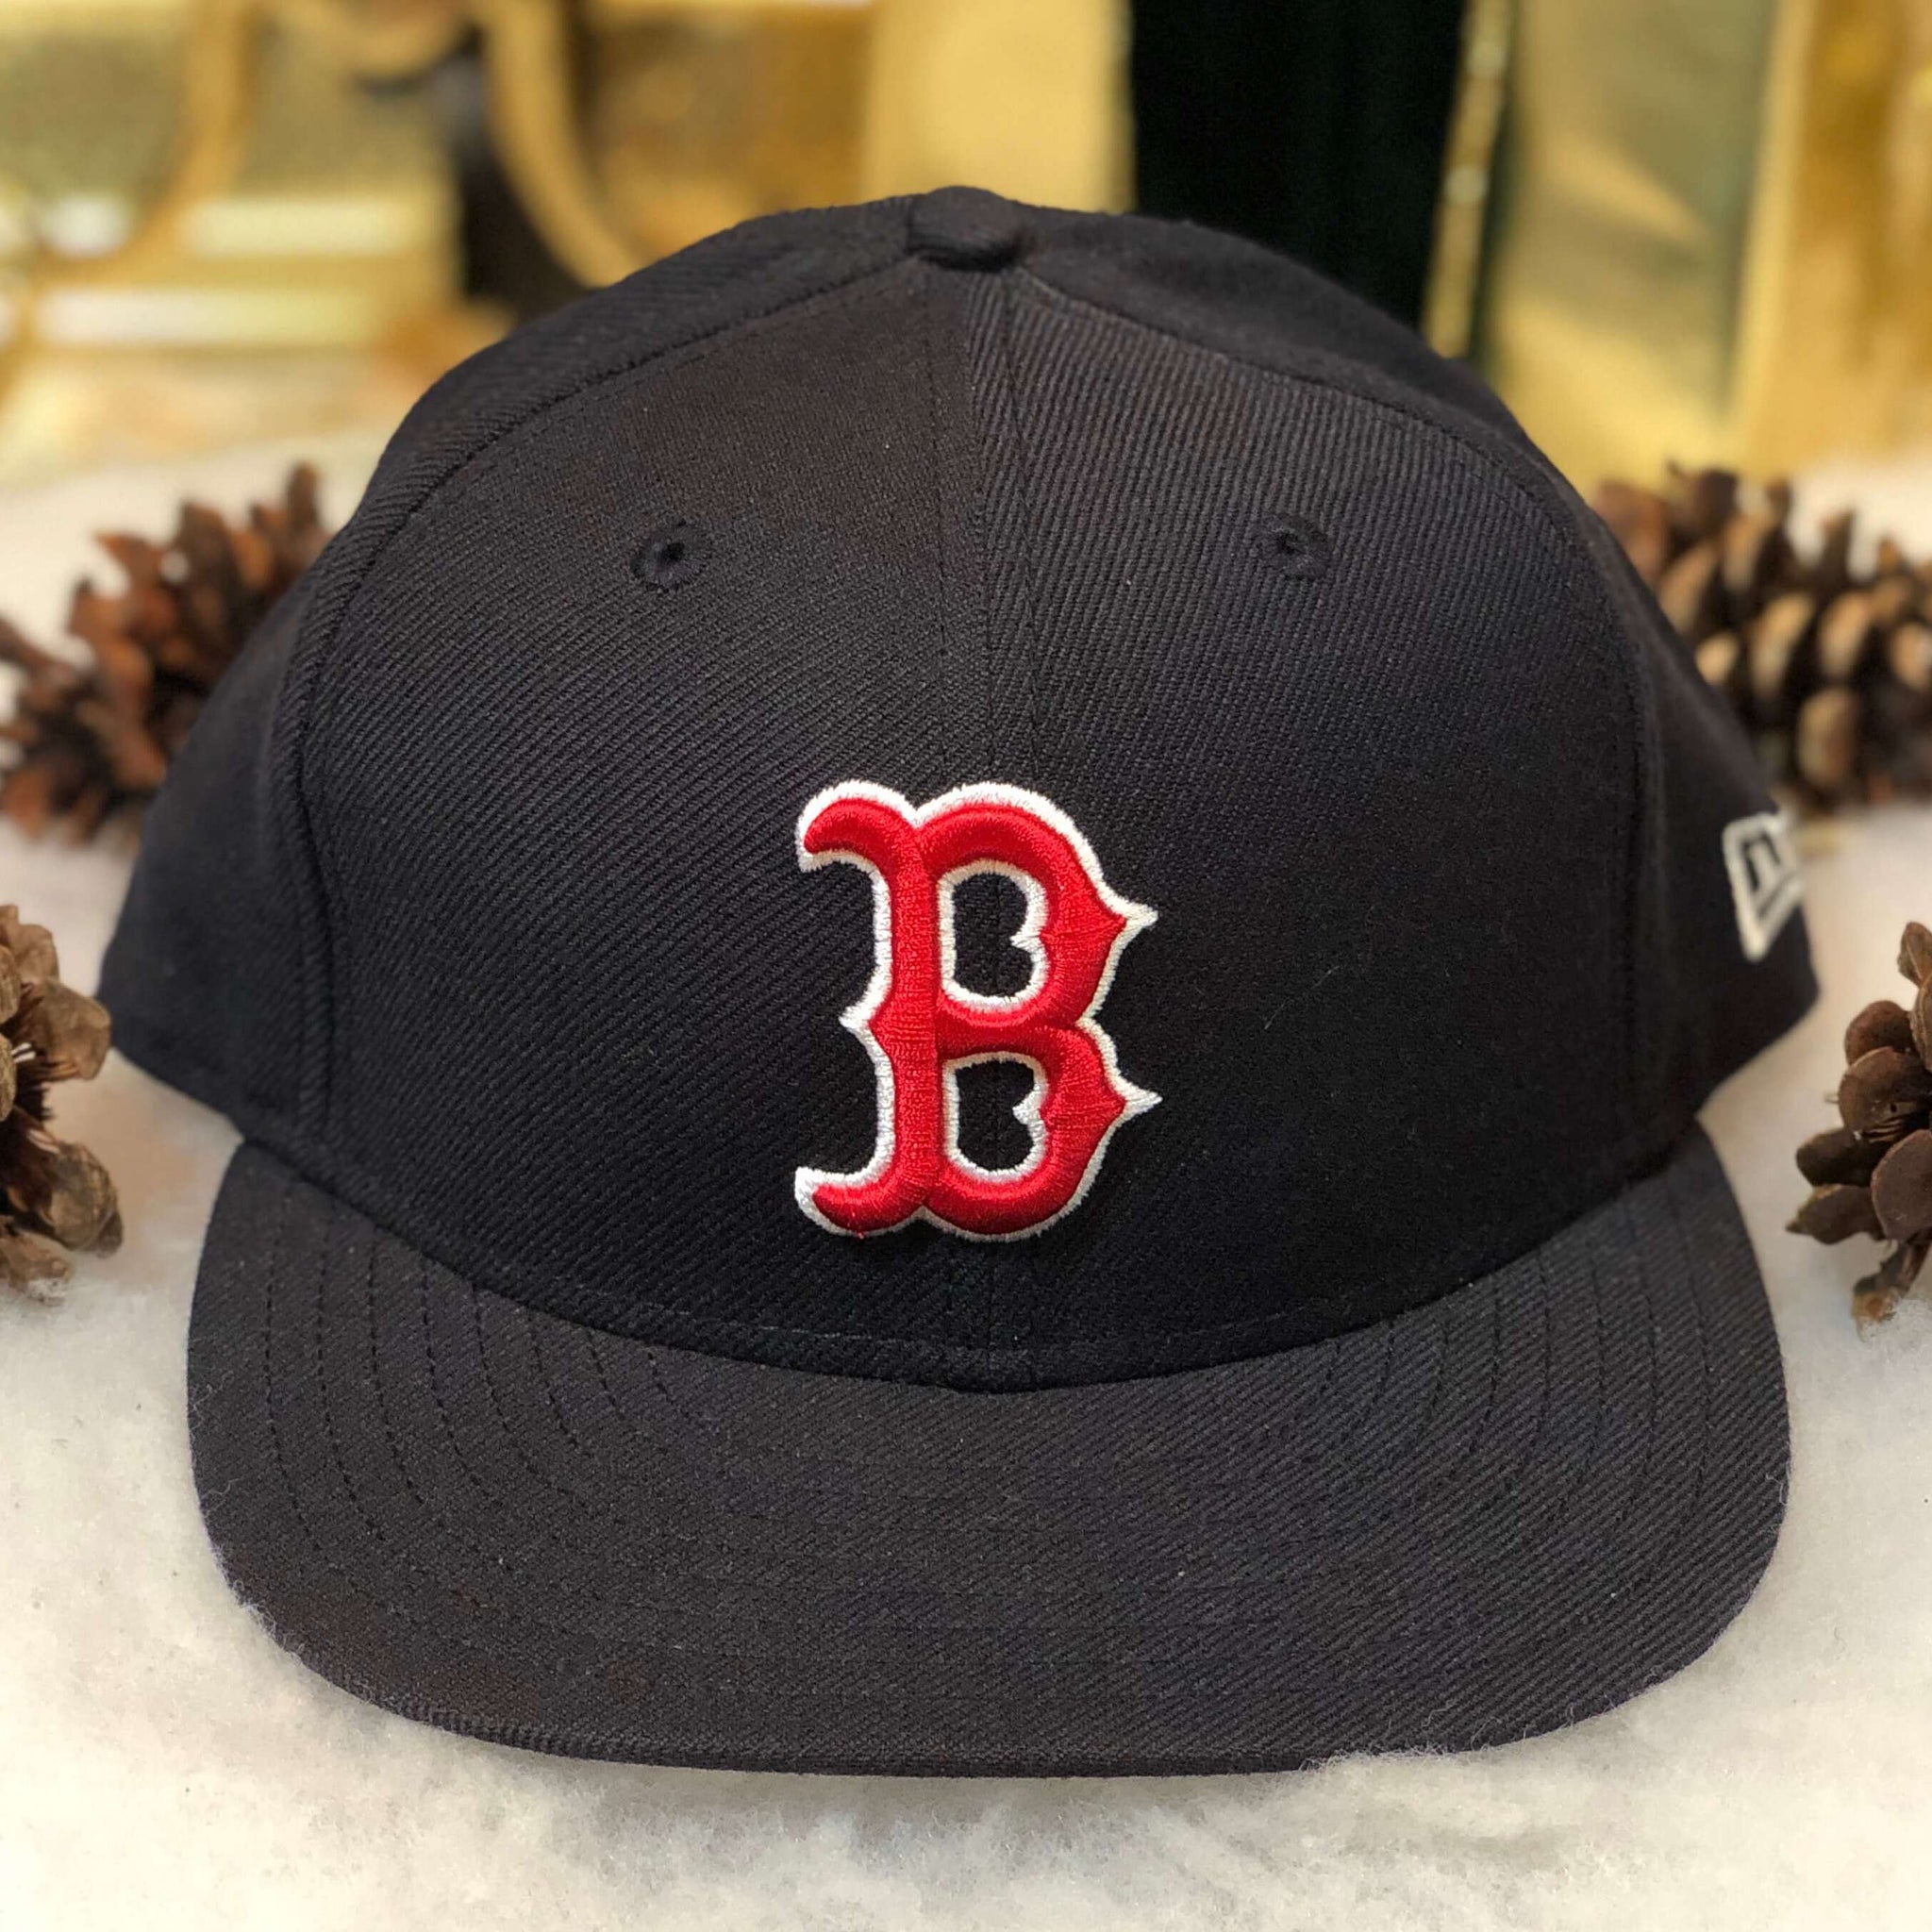 Deadstock NWOT MLB Boston Red Sox New Era Wool Fitted Hat 7 1/4